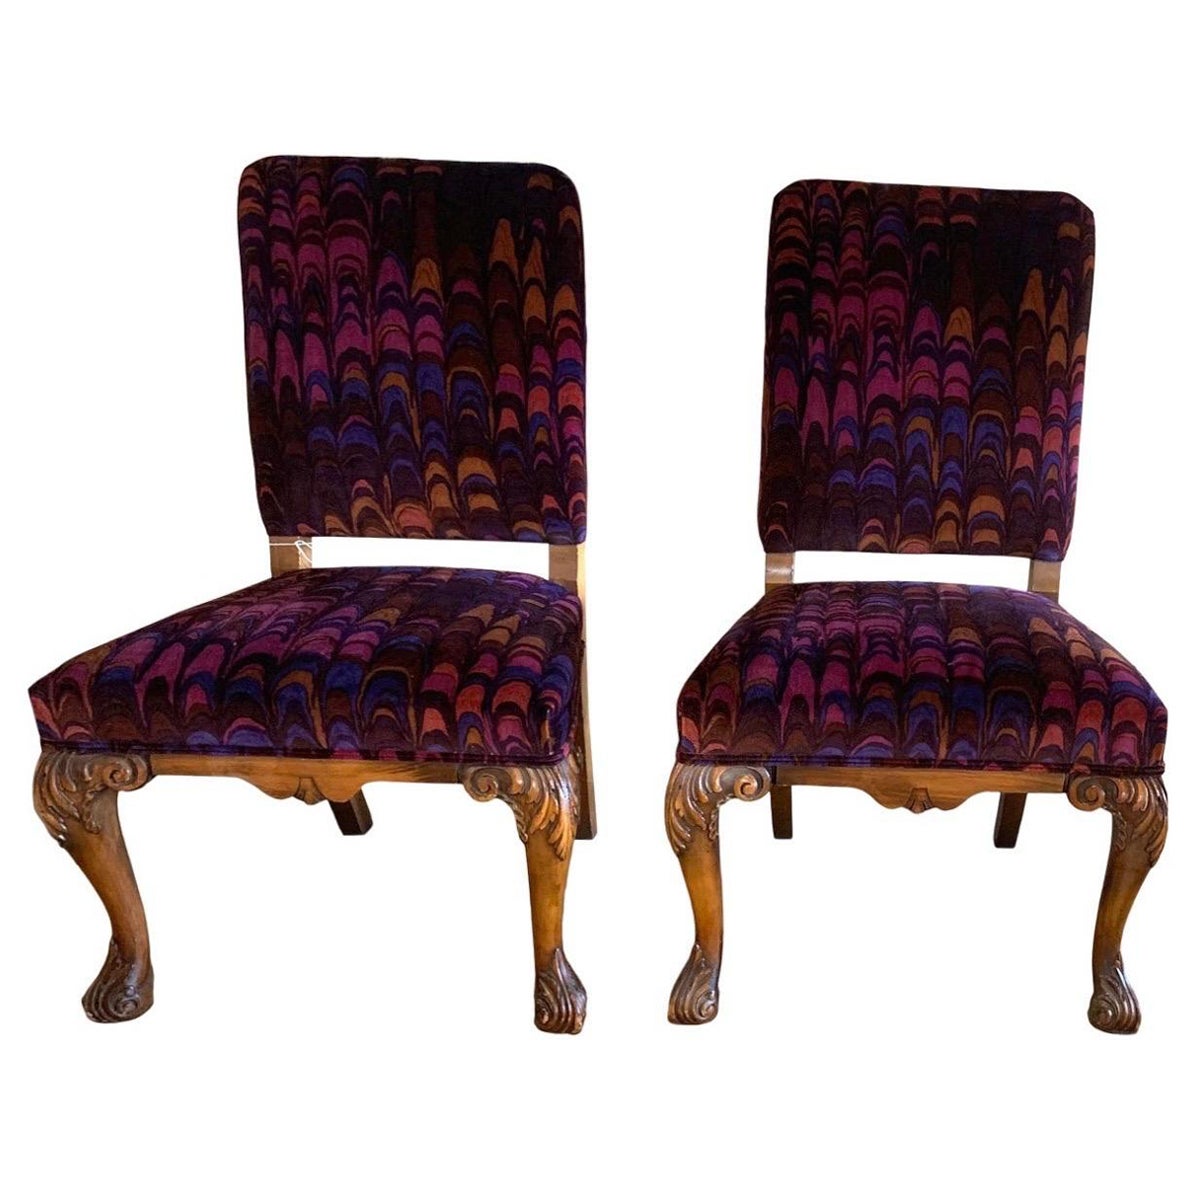 1960s Vintage Jack Lenor Larson Upholstered Side Chairs - a Pair